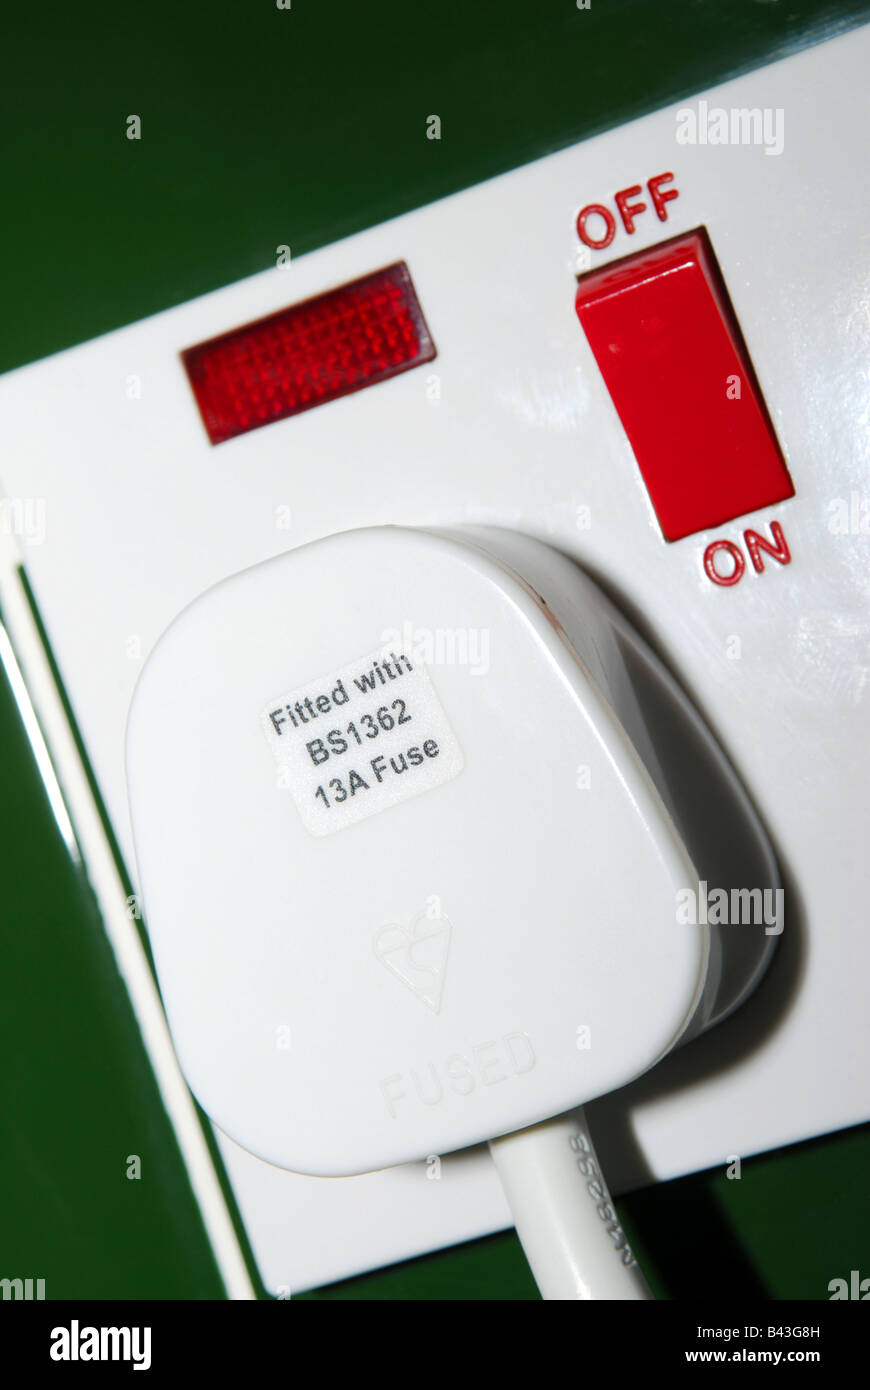 a standard plug in an electrical socket showing the on off wording Stock Photo